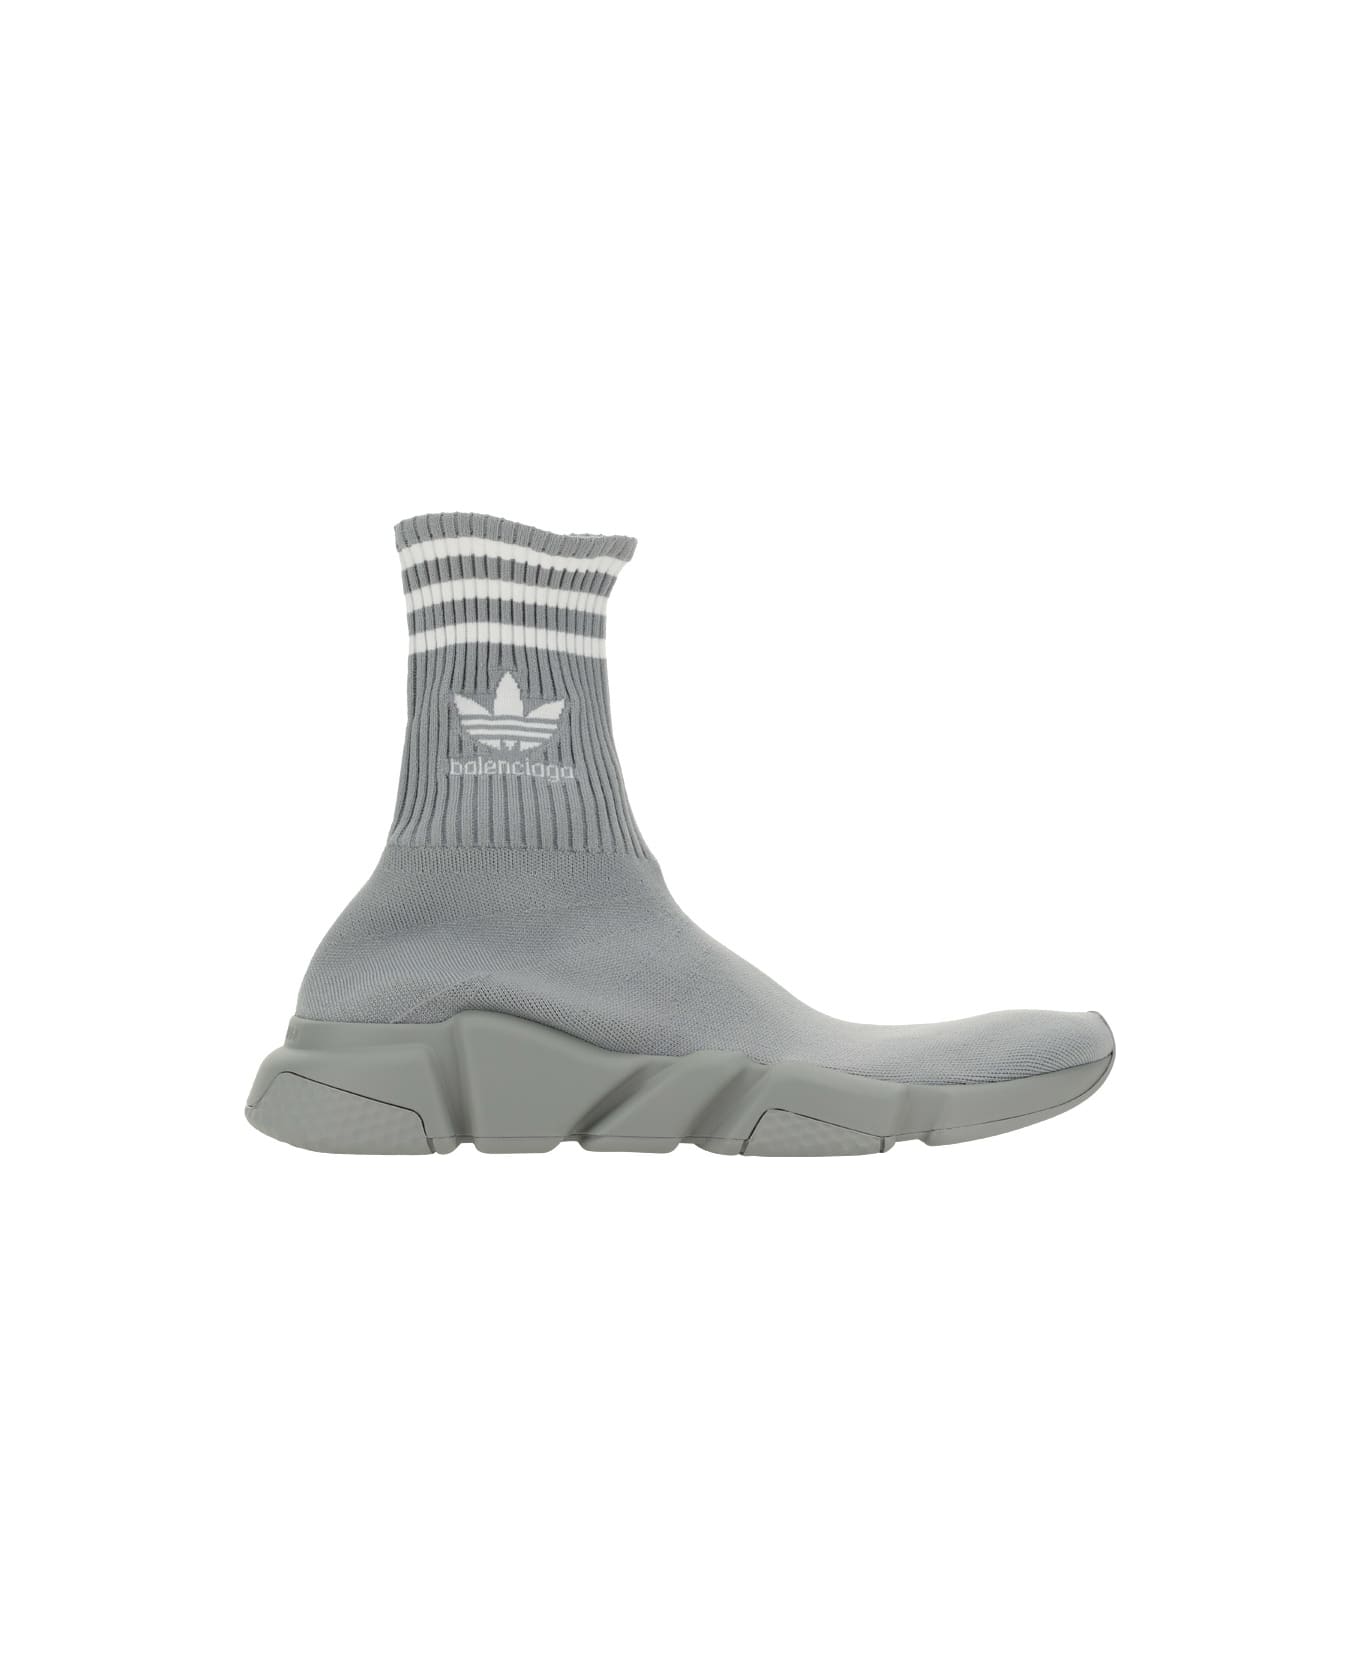 Balenciaga Speed Trainers Knitted Sock-sneakers - Grey スニーカー